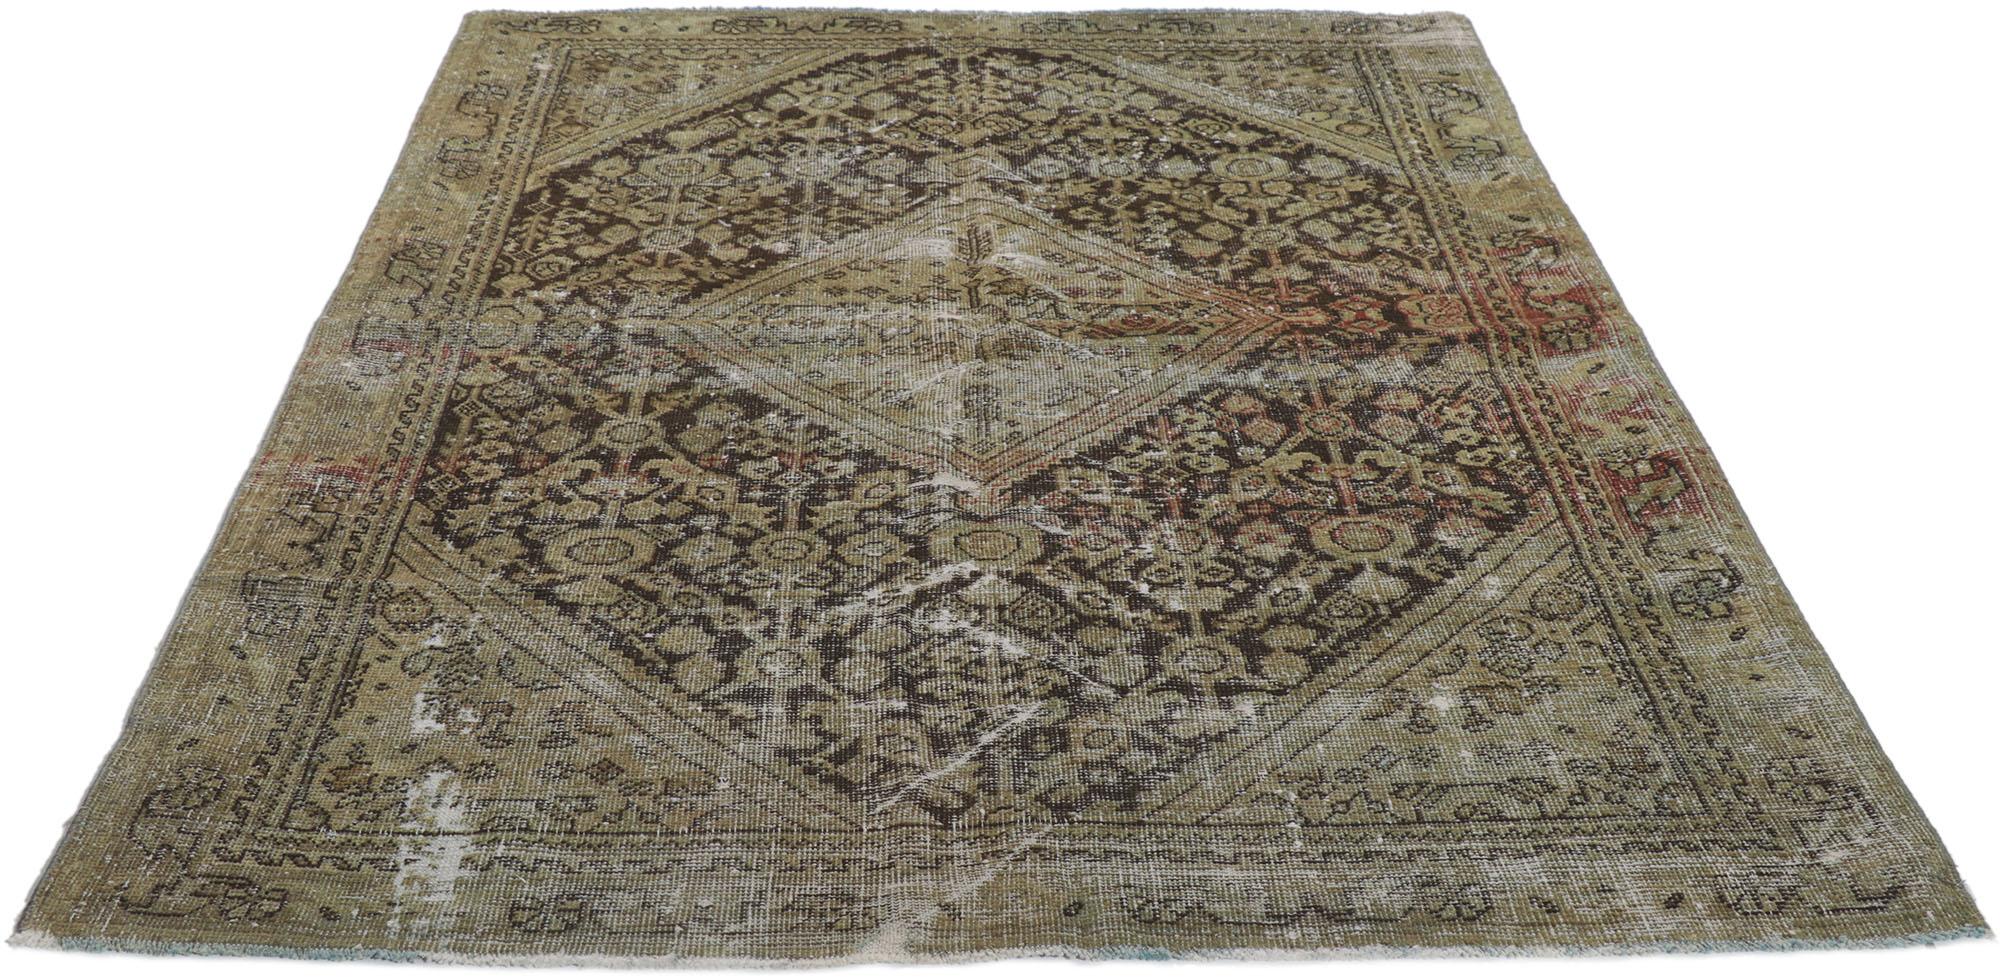 Malayer Worn-In Distressed Antique Persian Mahal Rug For Sale